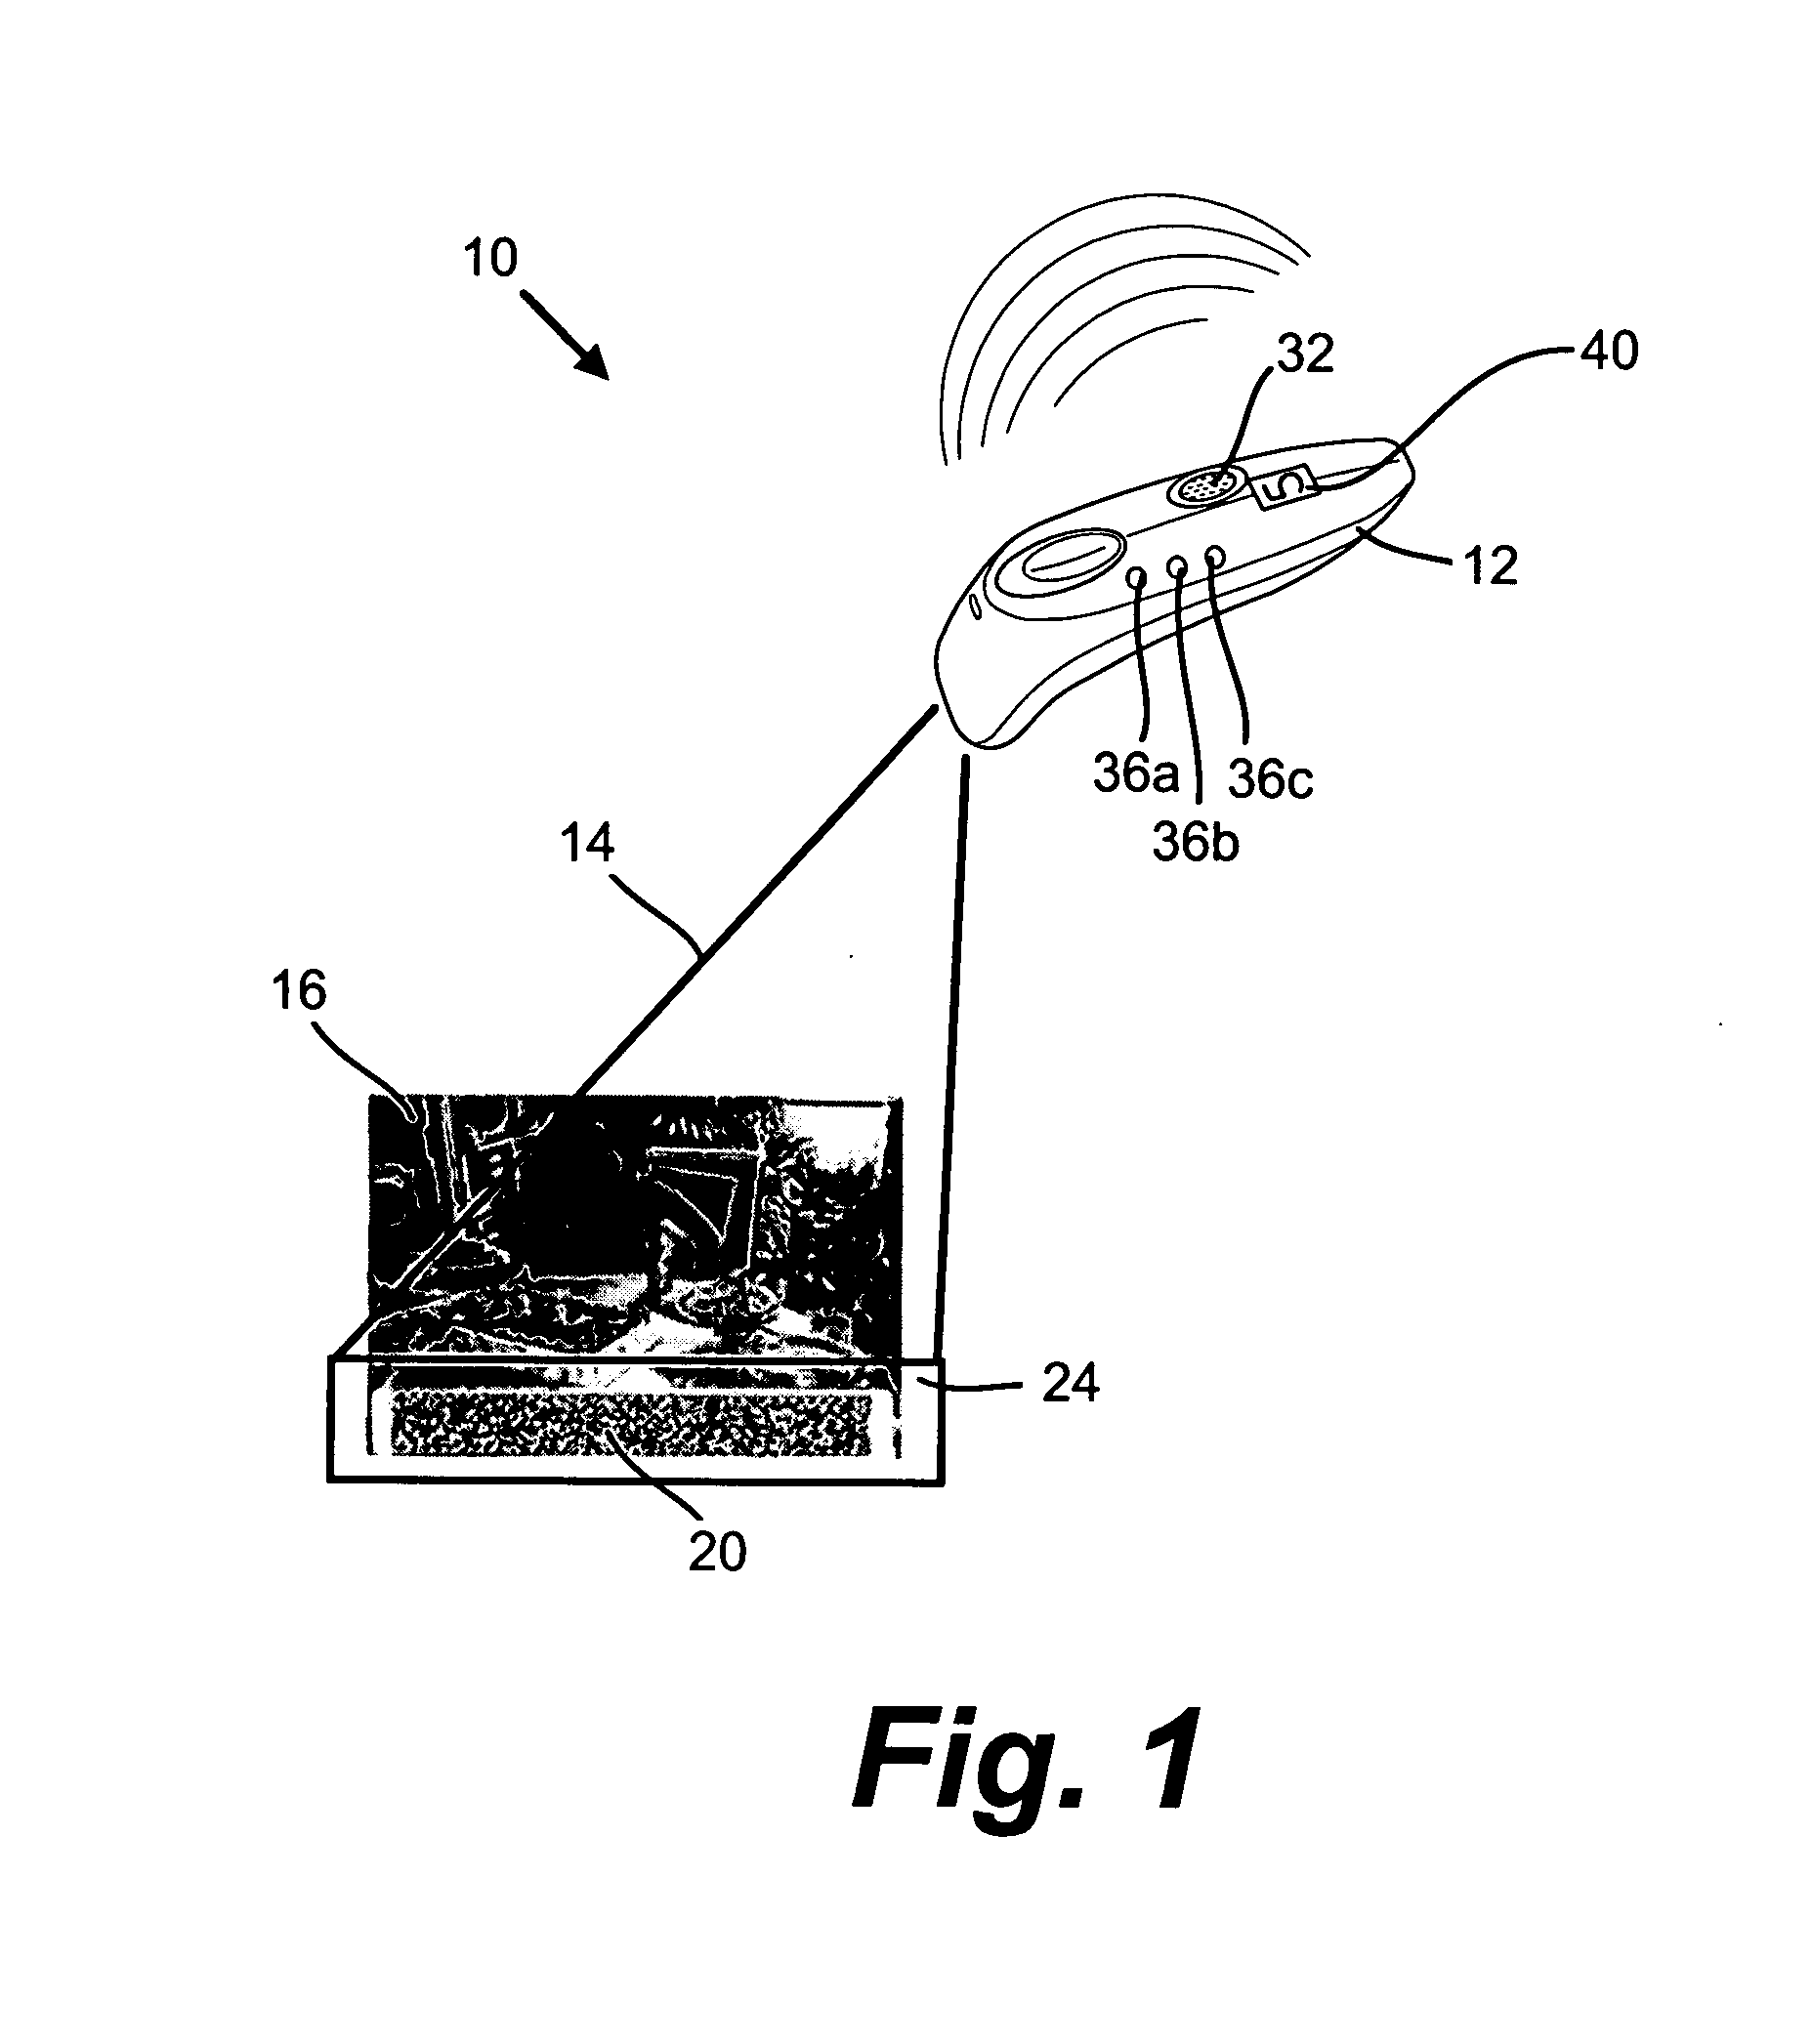 Systems and Methods for Generating, Reading and Transferring Identifiers